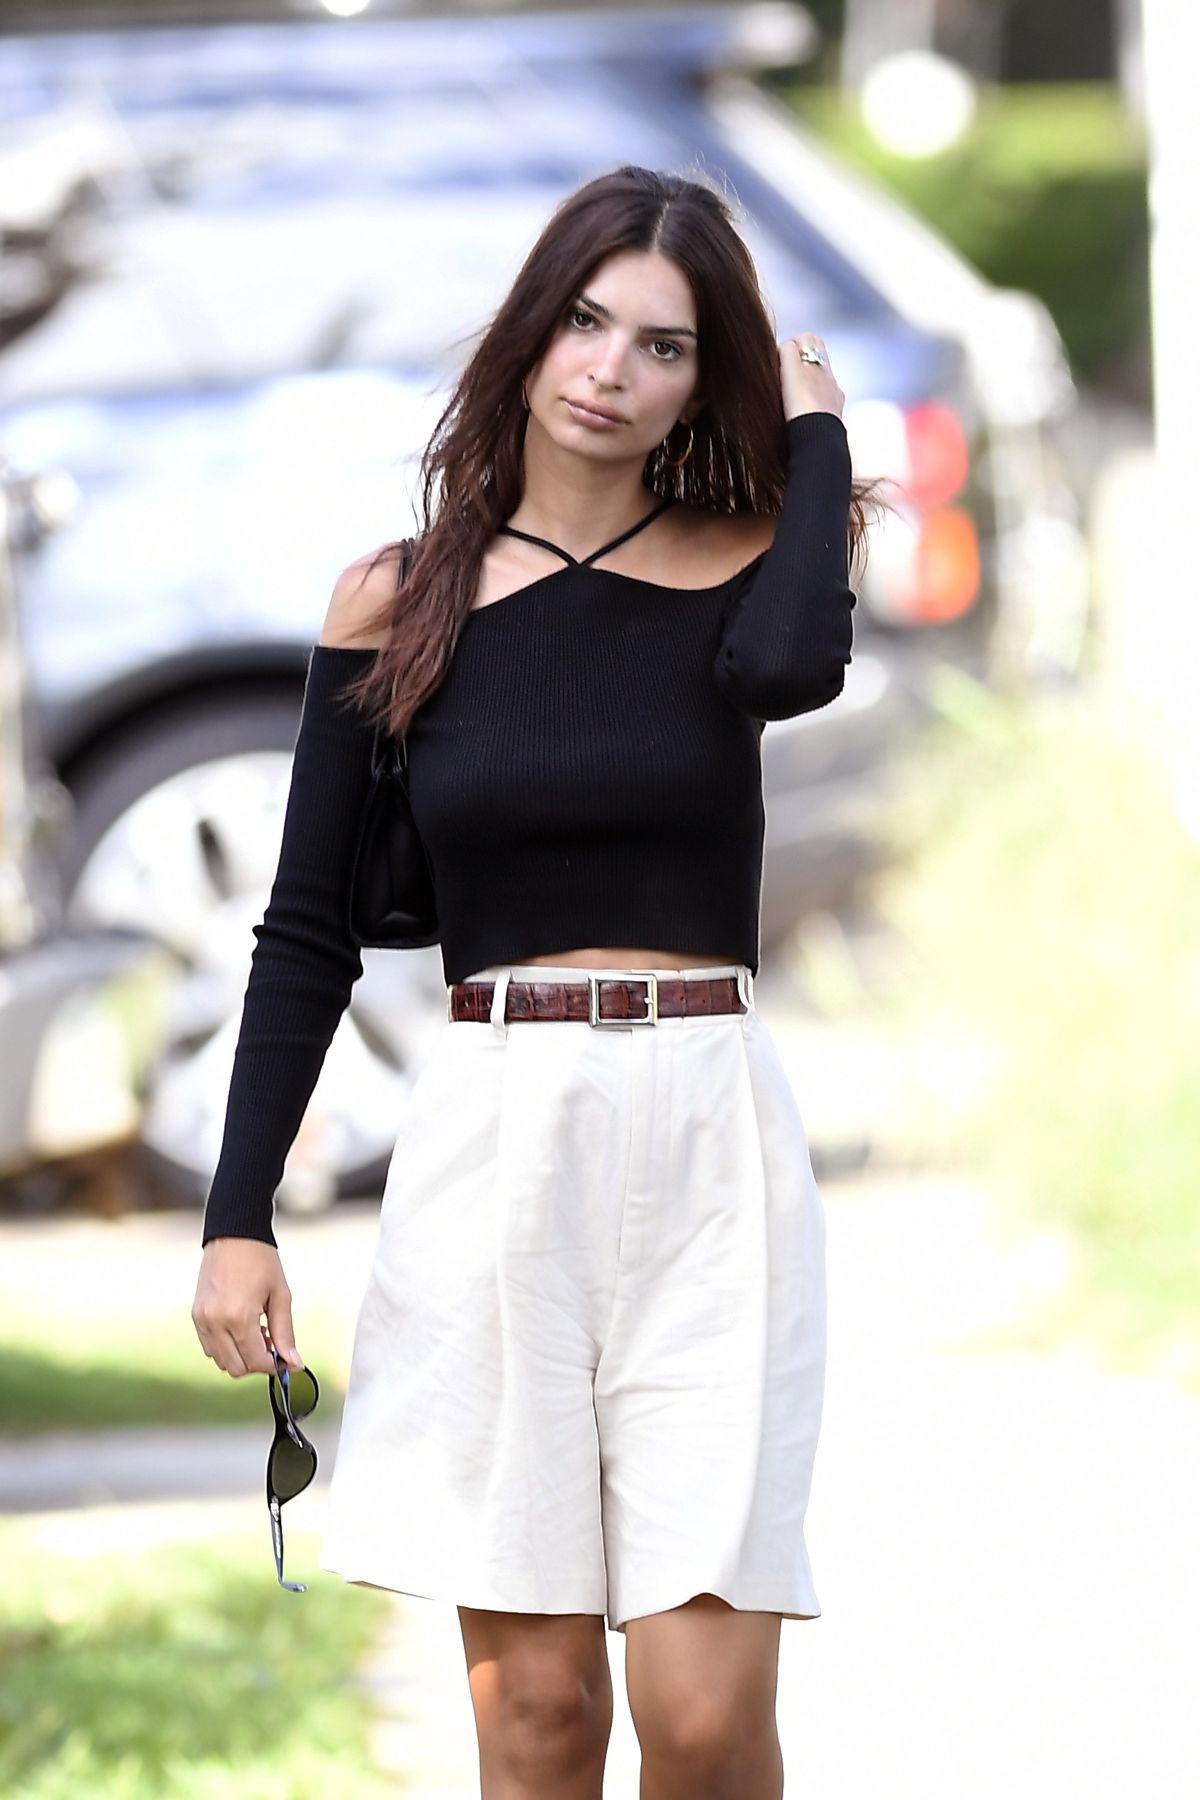 emily-ratajkowski-out-and-about-in-new-york-08-23-2020-4.jpg